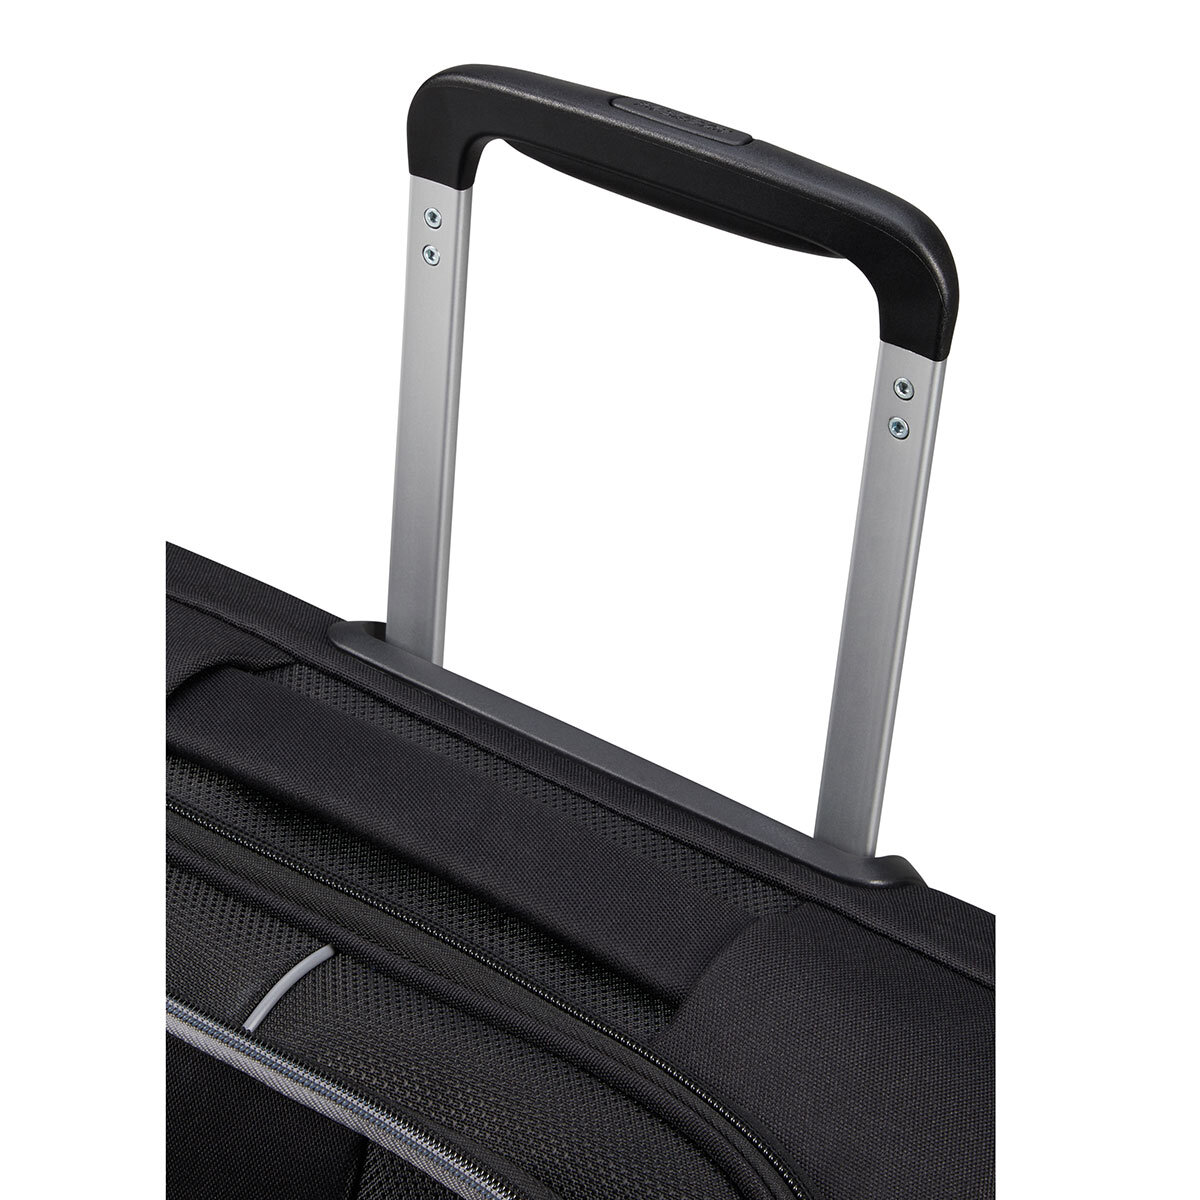 American Tourister Softside Underseater Carry On in Black